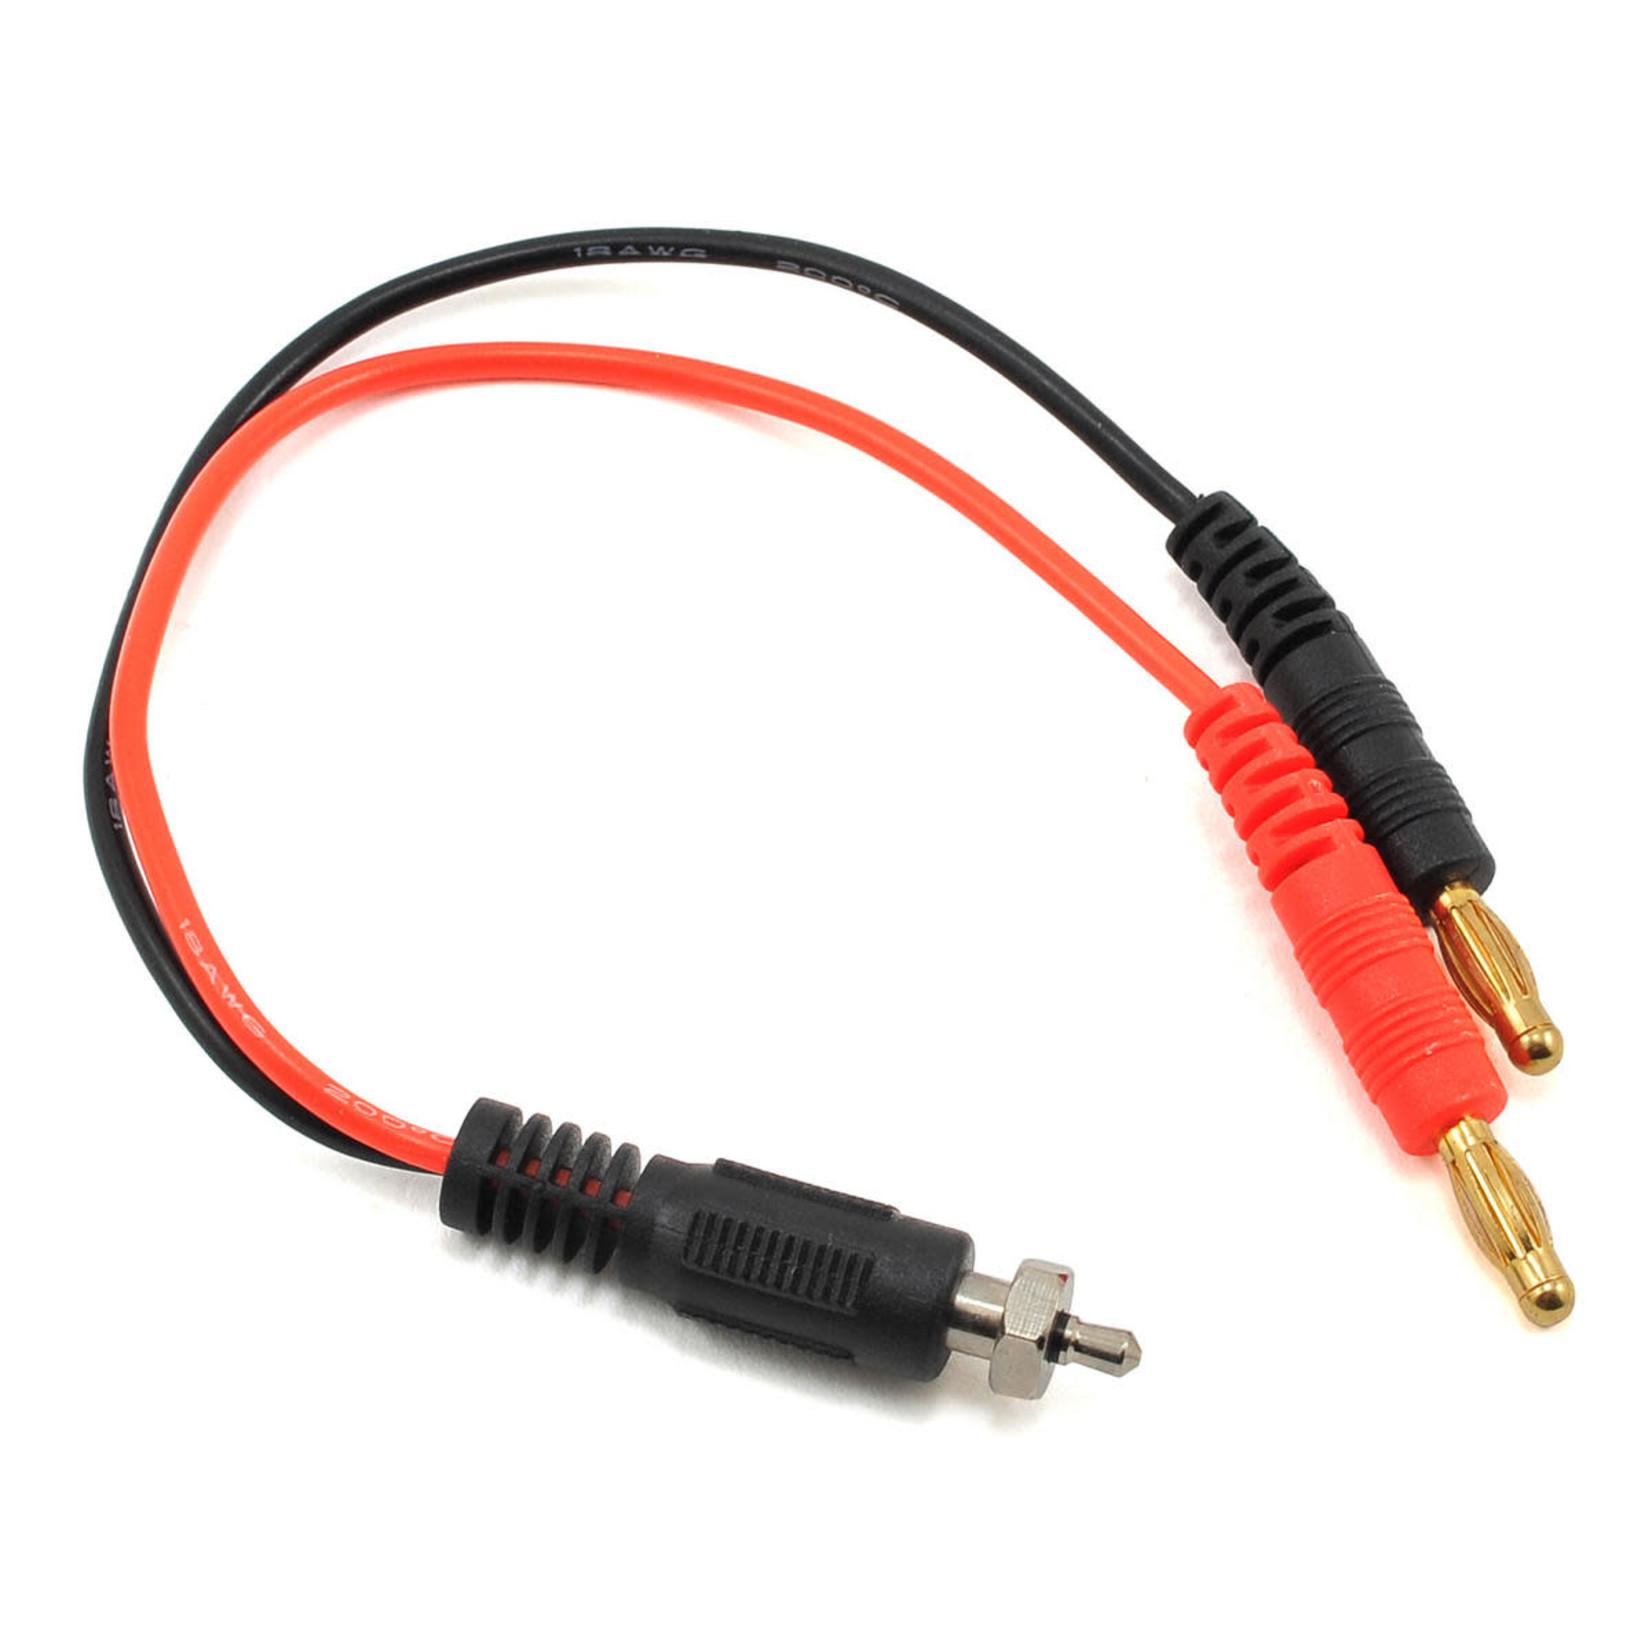 ProTek RC PTK-5240 ProTek RC Glow Ignitor Charge Lead (Ignitor Connector to 4mm Bullet Connector)